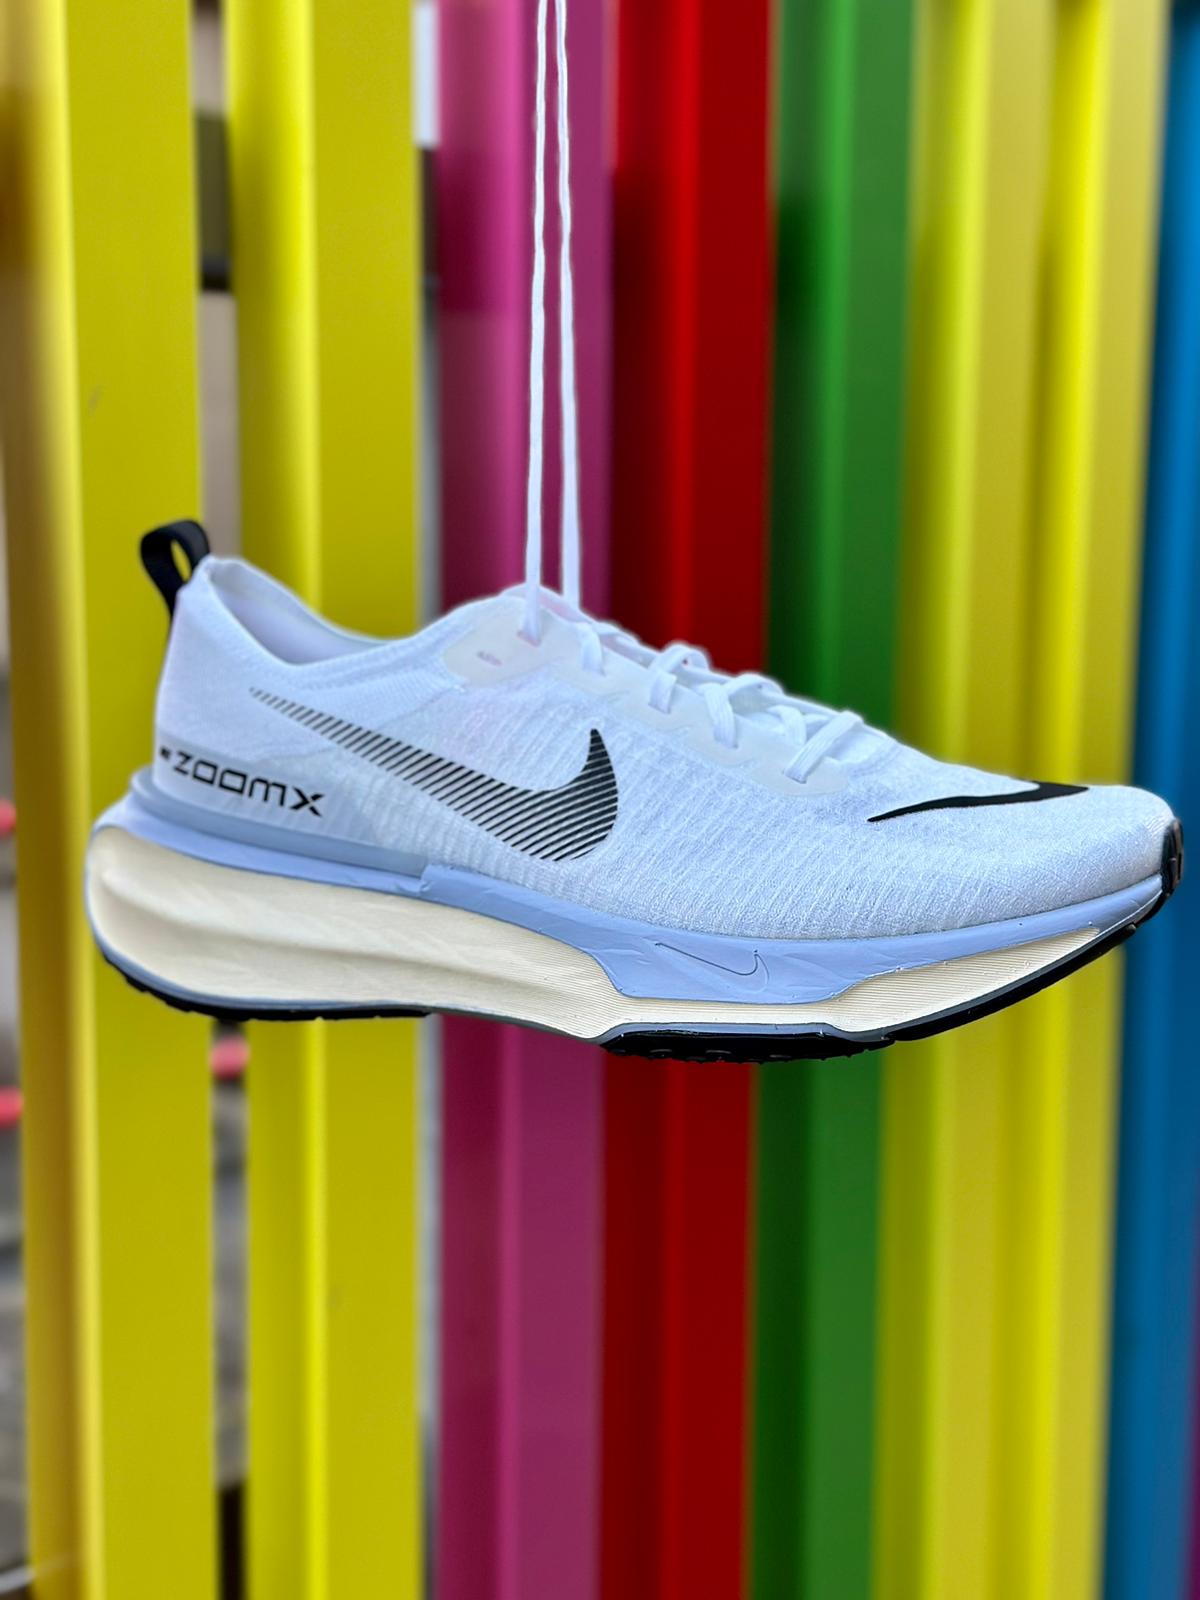 Nike ZoomX Invincible Run 3 running shoe hanging in the air against a rainbow striped gate